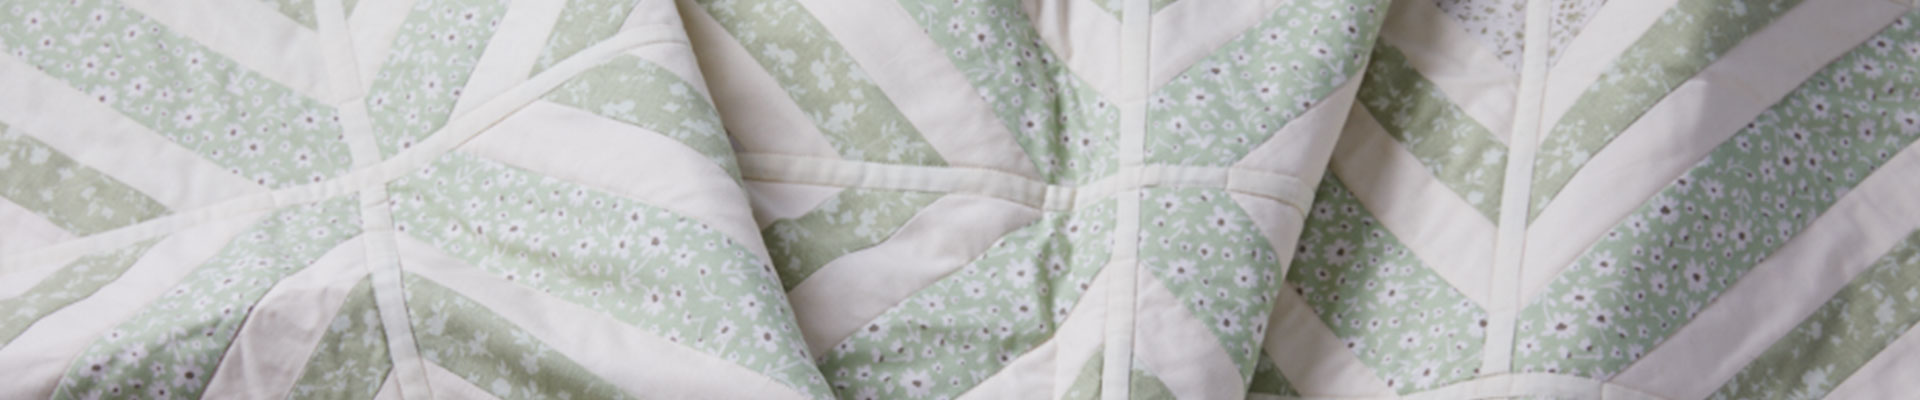 Get quilting resources and shop quilt cotton at Joann Stores.